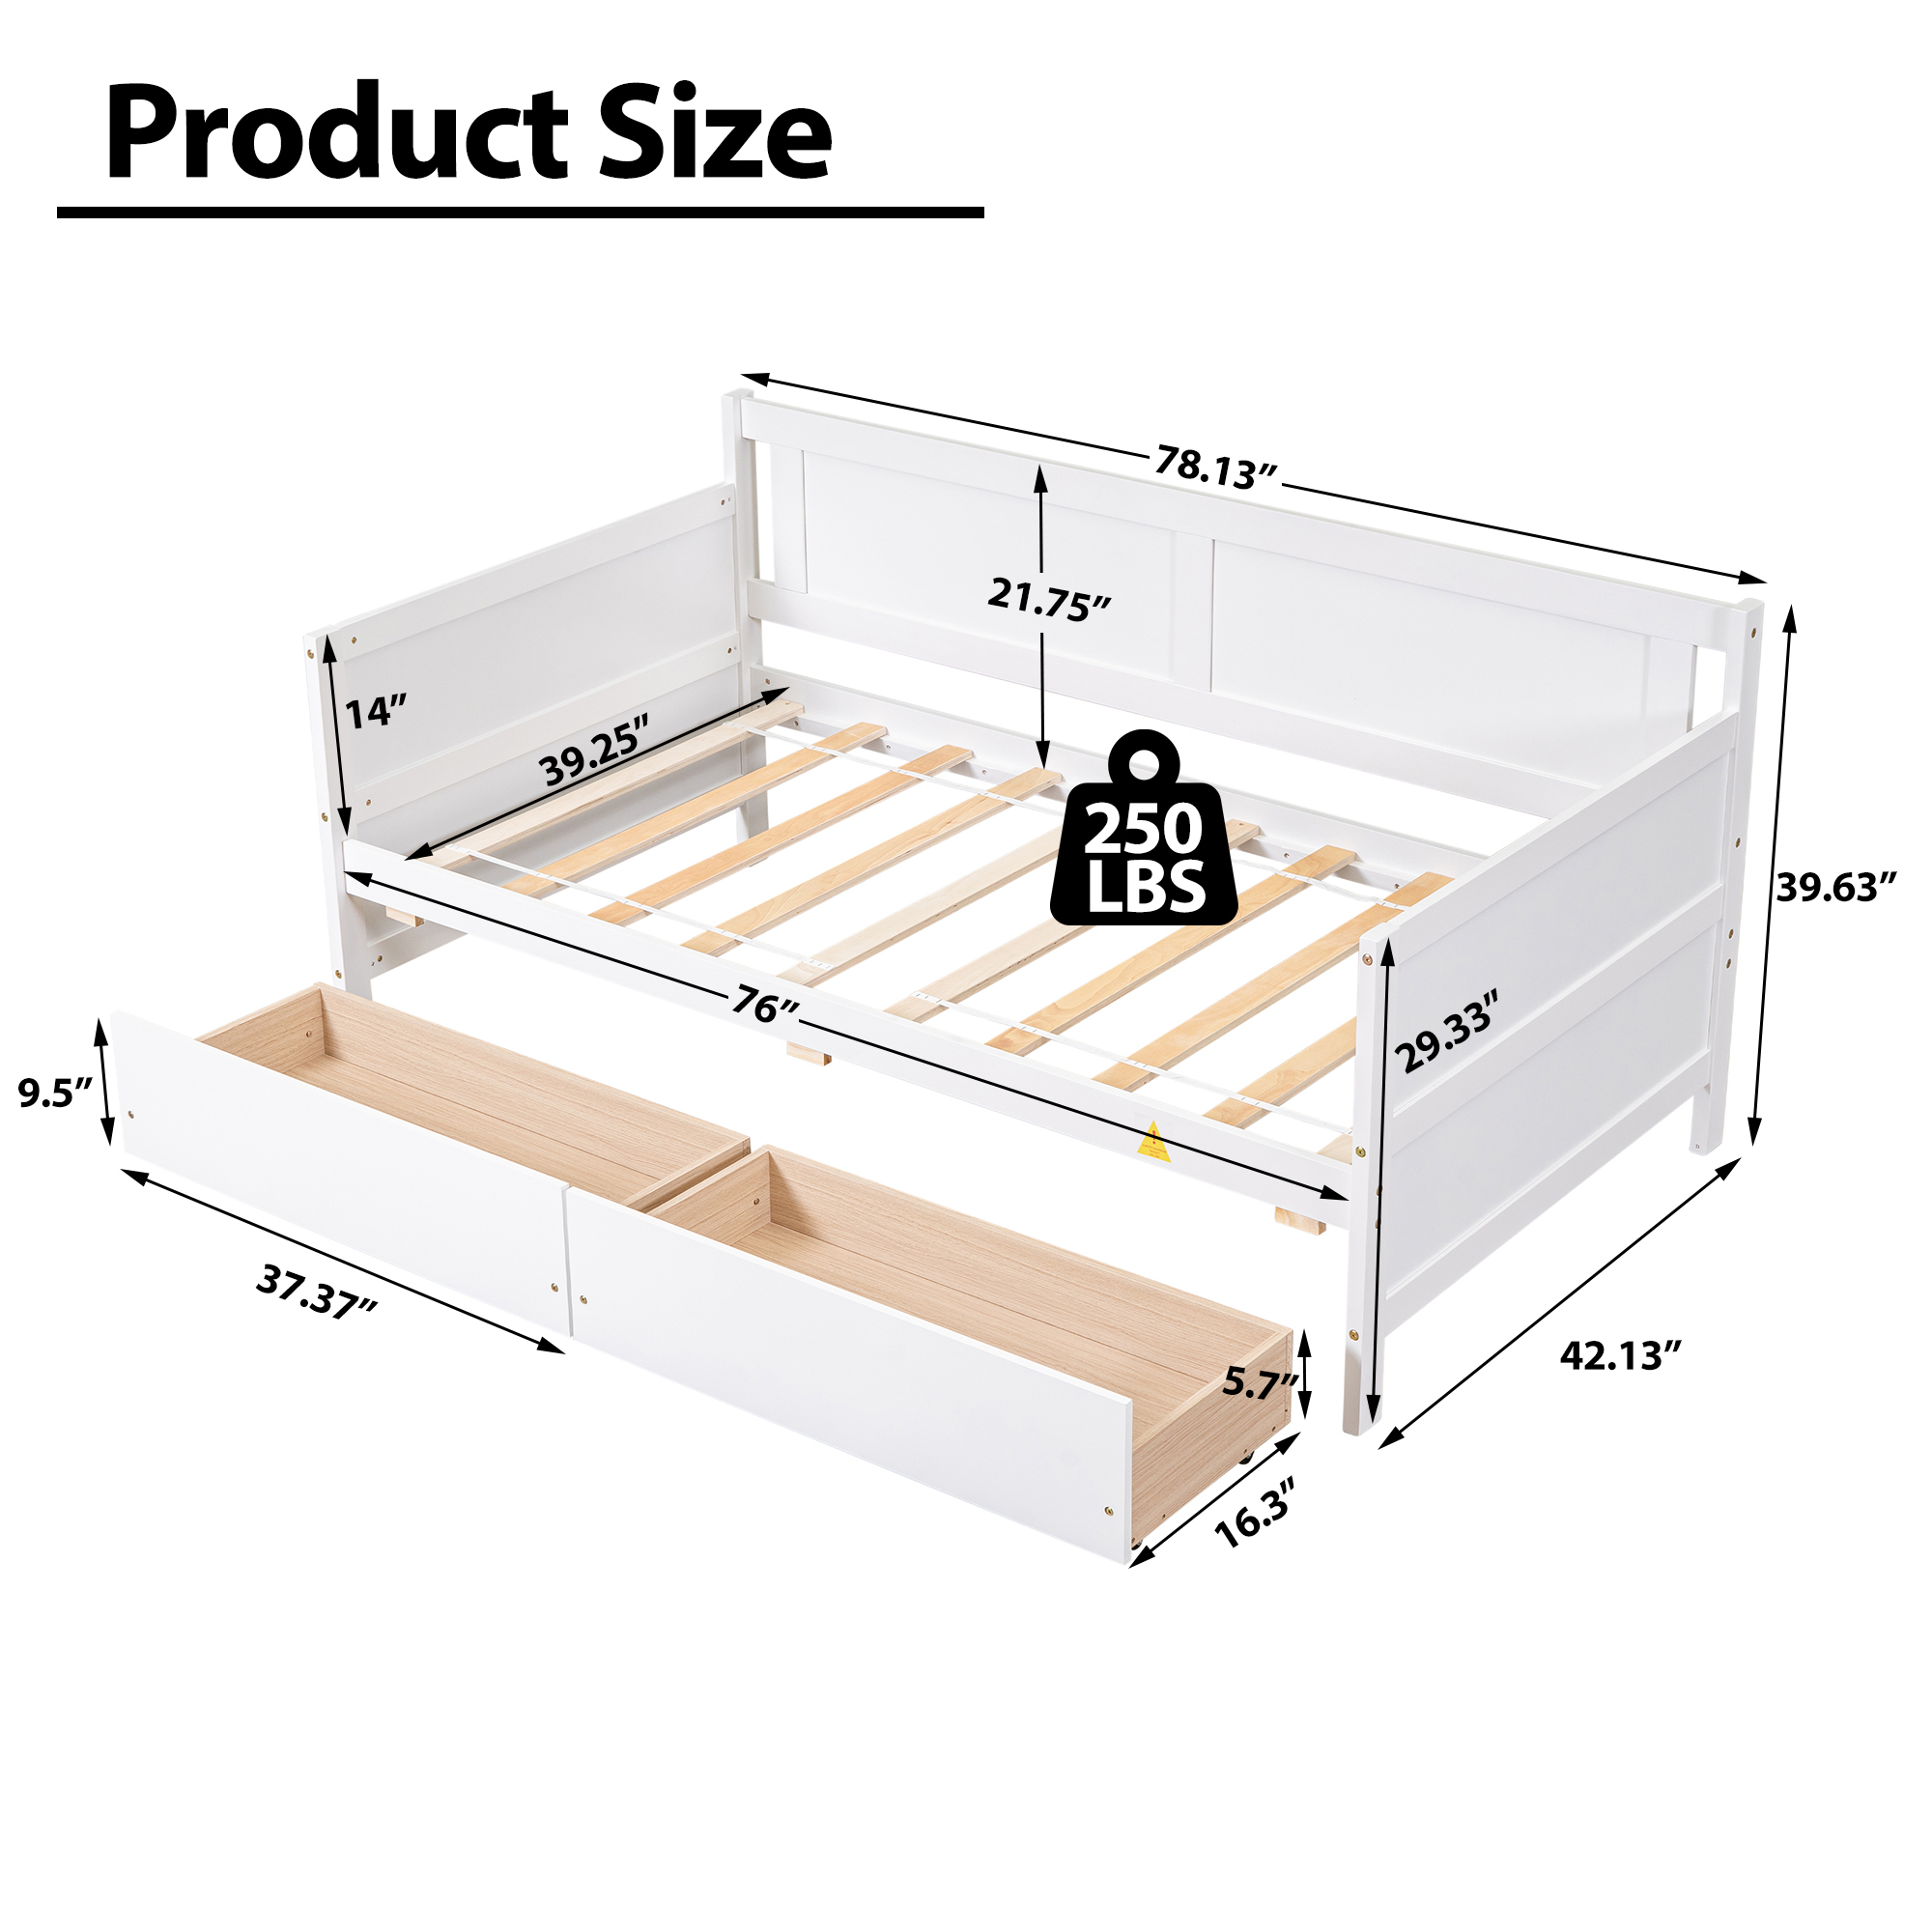 uhomepro White Daybed with Storage Drawers, Wood Twin Bed Frame Sofa Bed for Kids Girls Boys, Living Room Bedroom Furniture, No Box Spring Needed - image 3 of 11